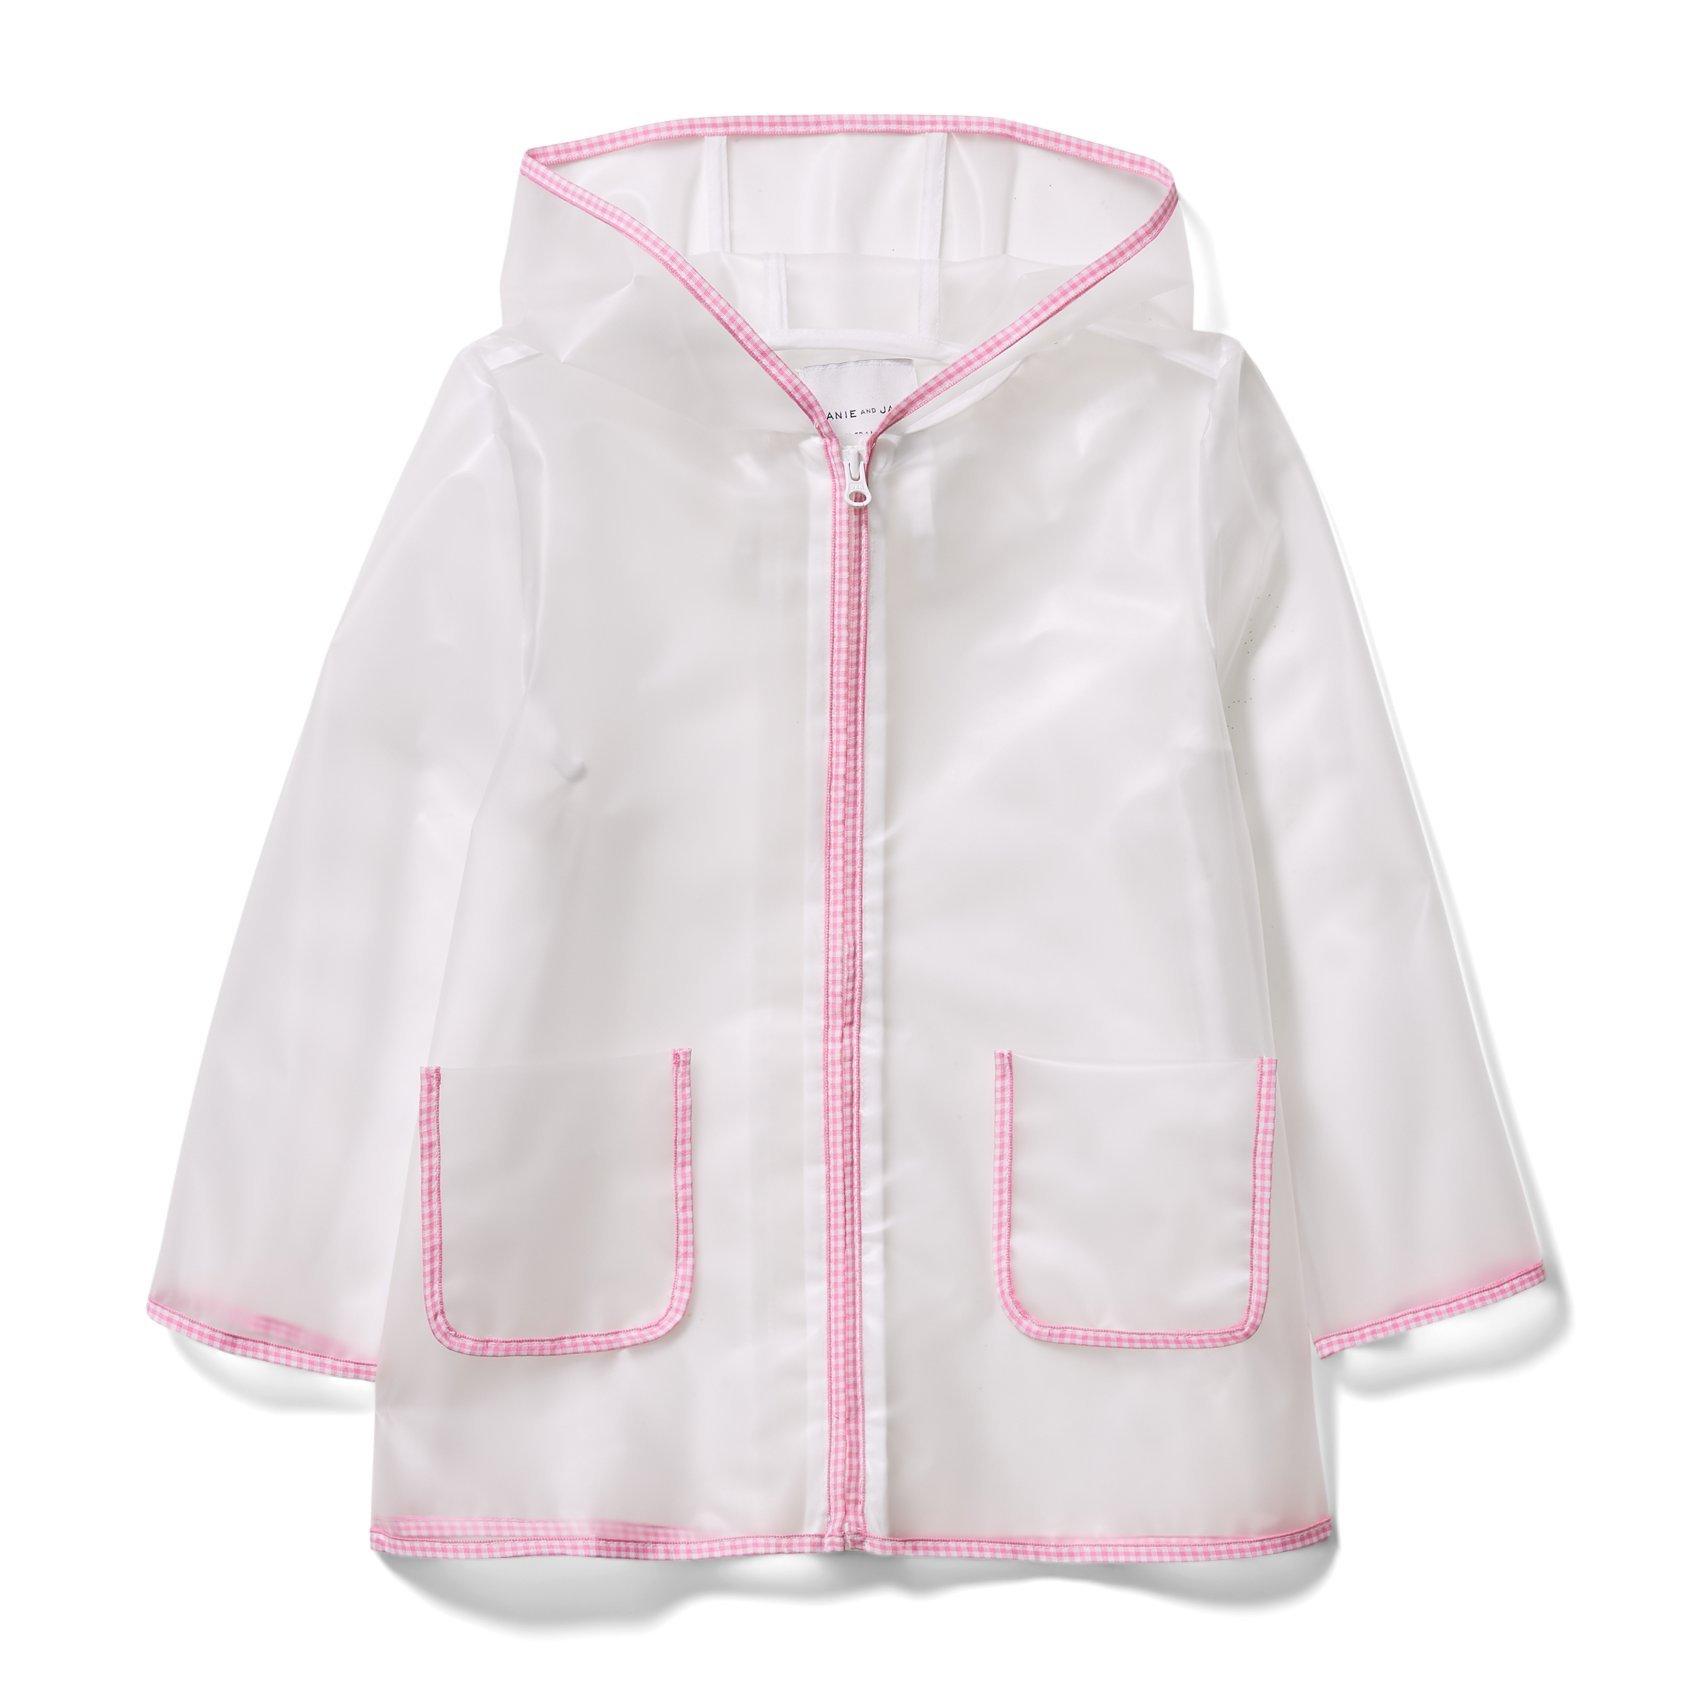 Girl Clear Hooded Translucent Raincoat by Janie and Jack